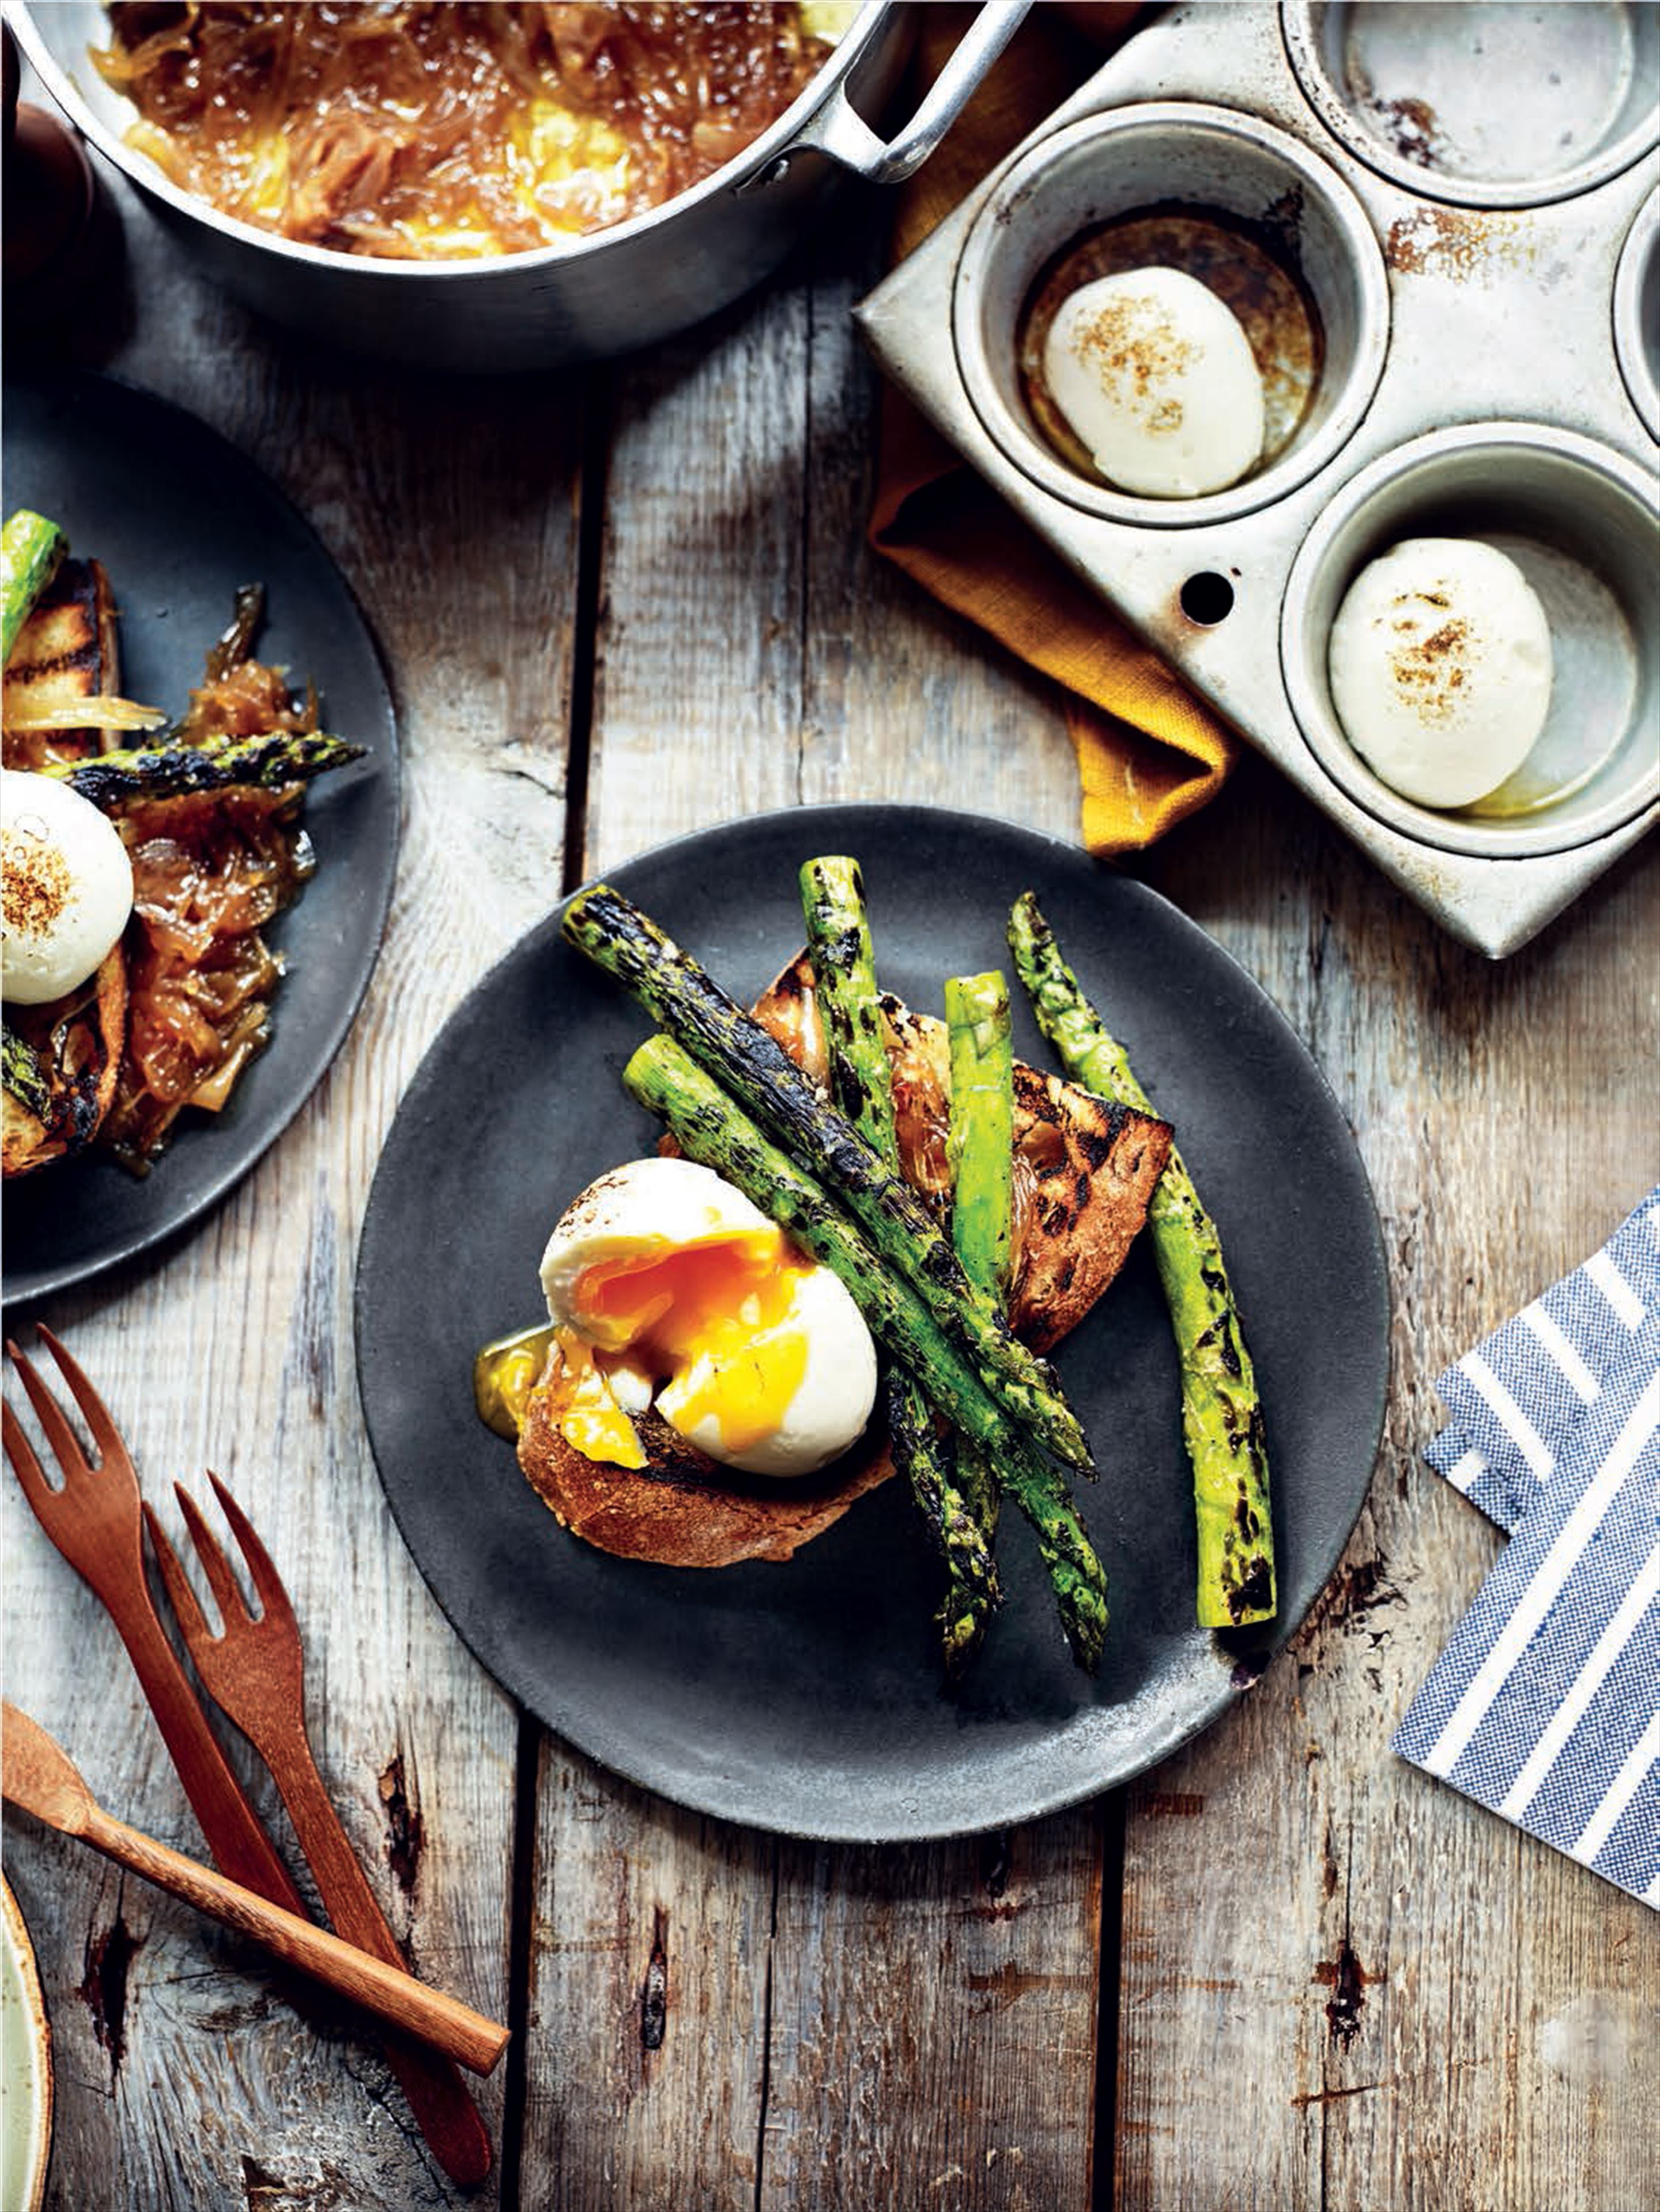 Smoky eggs with asparagus and sweet shallots on sourdough